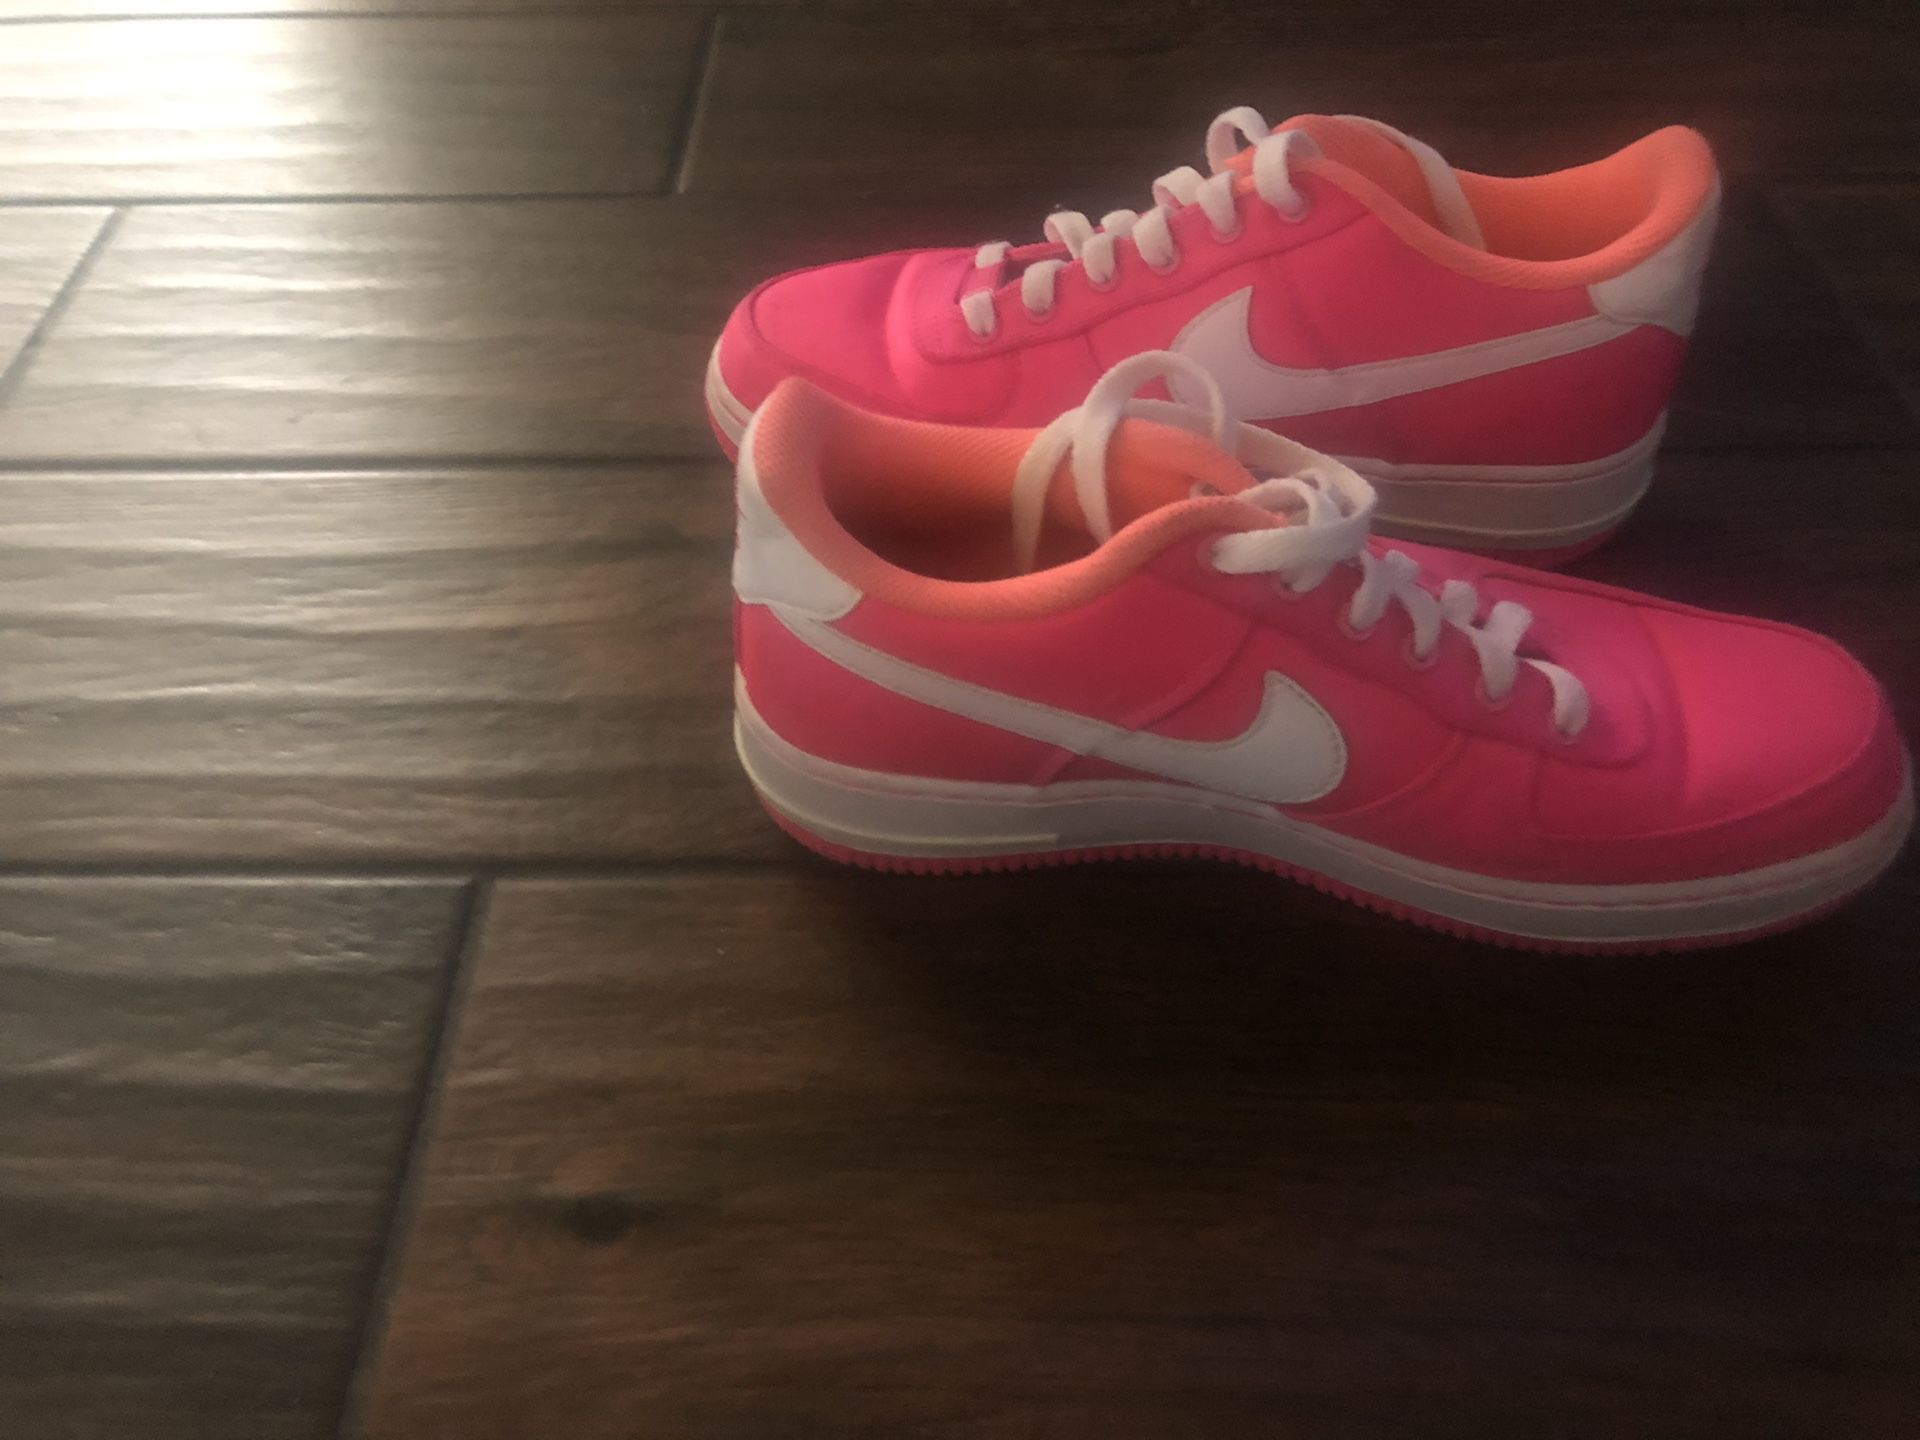 Hot pink Nike’s